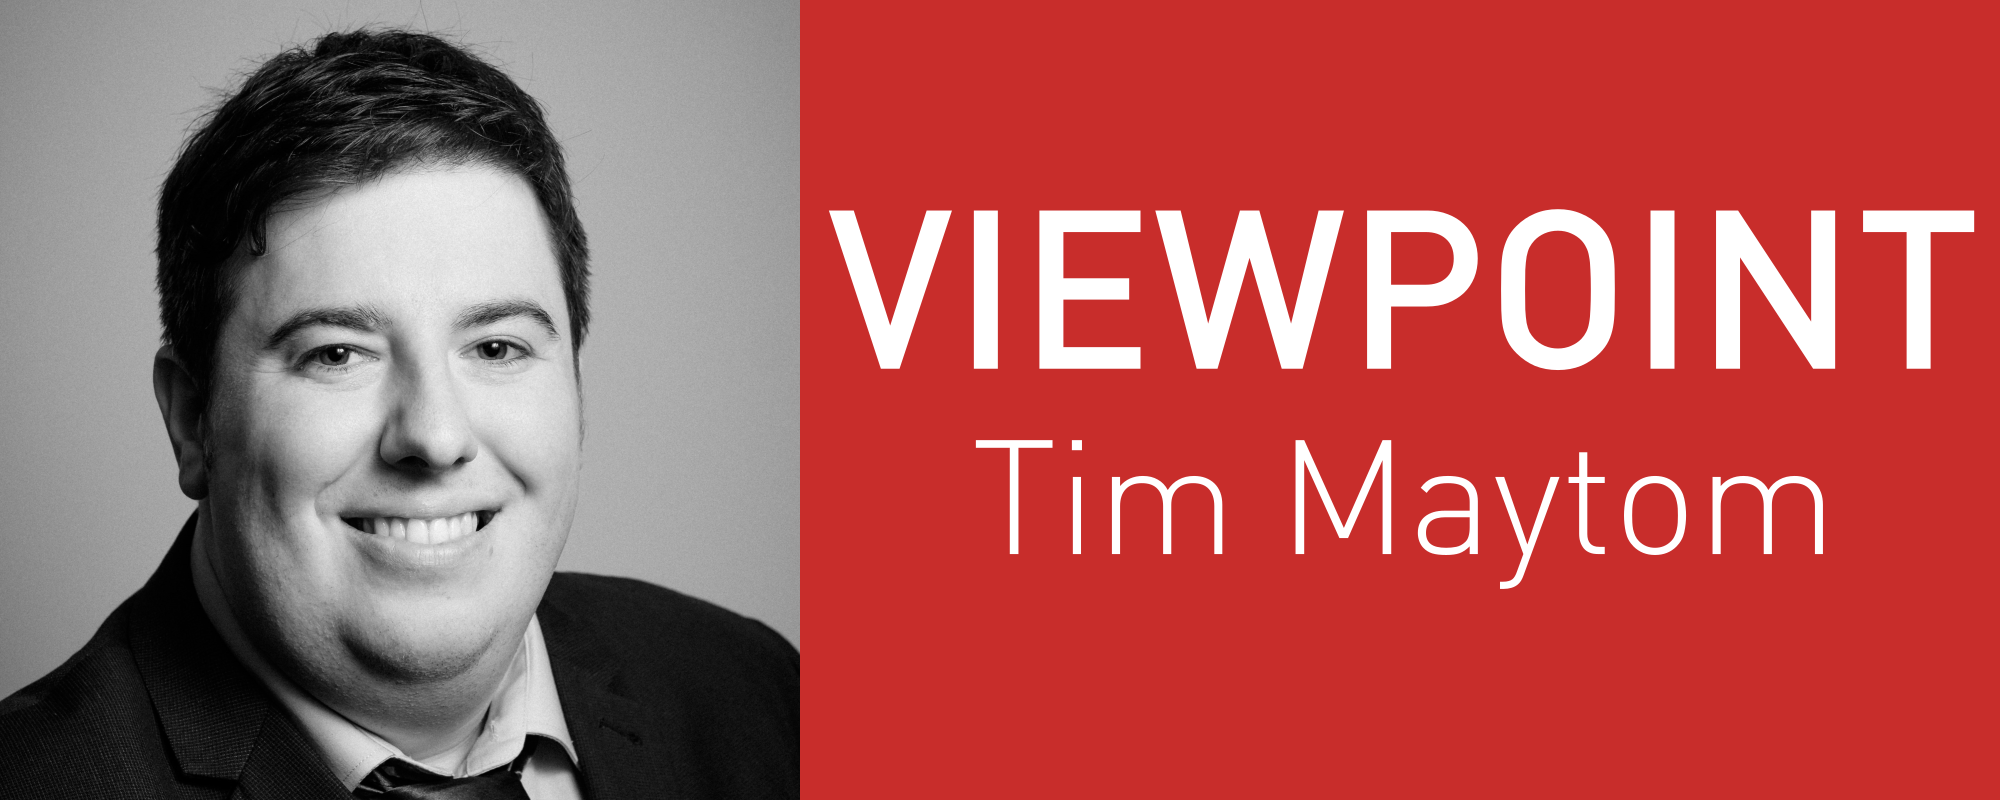 Tim Viewpoint